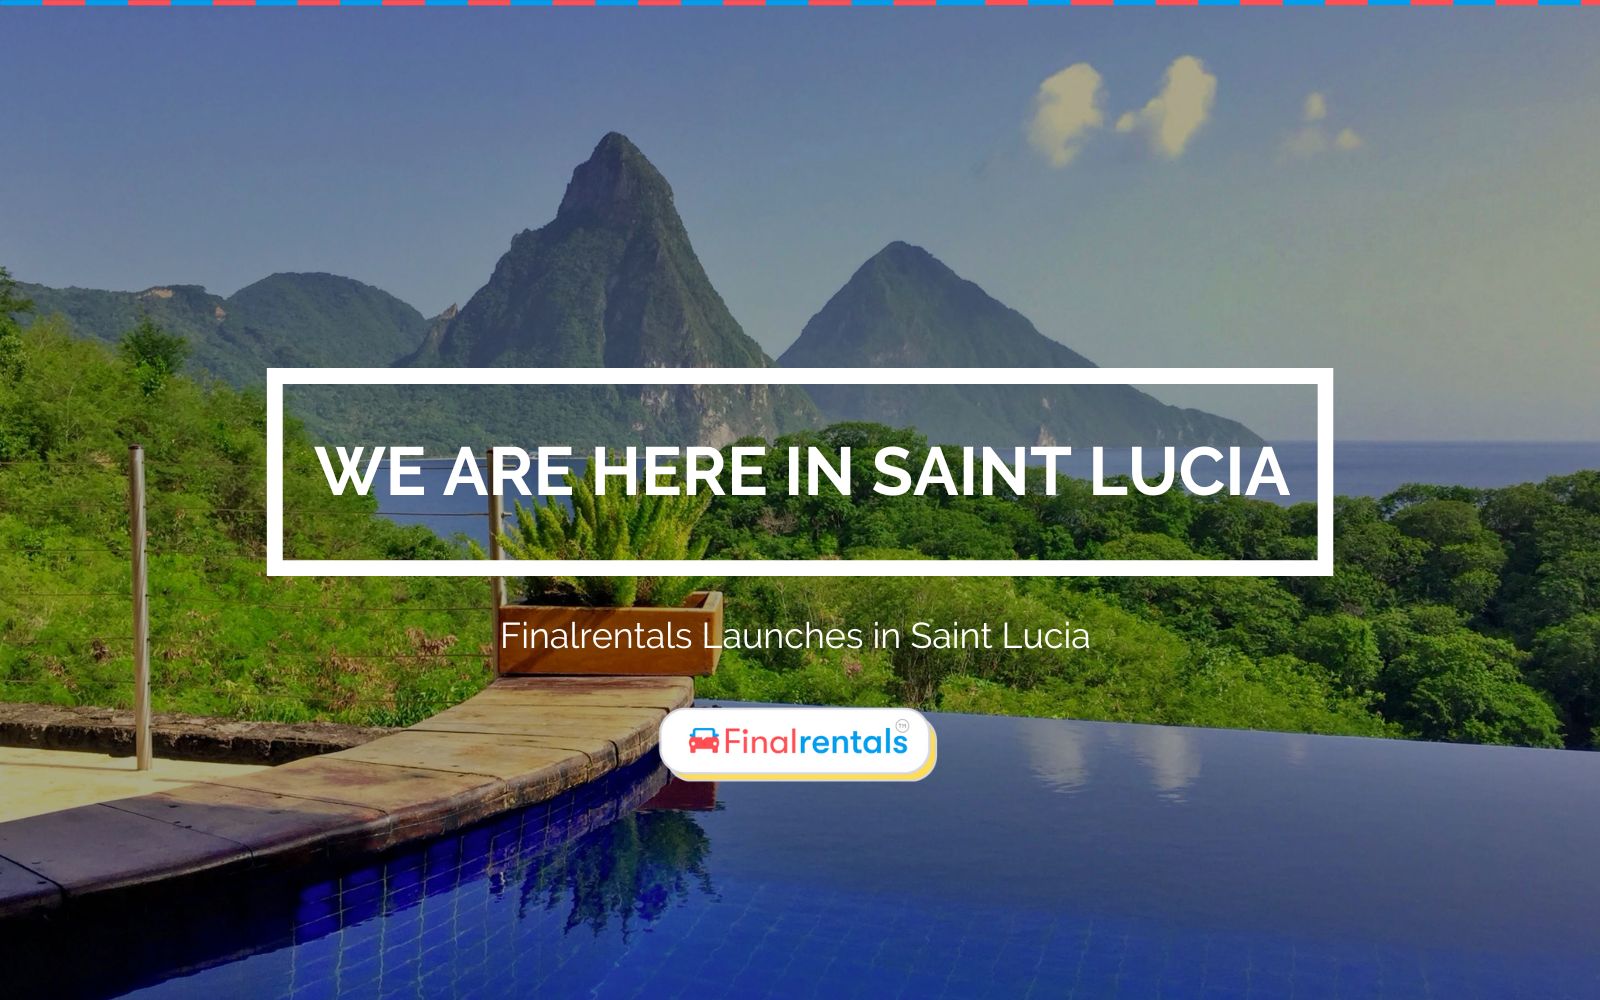 Finalrentals Launches in Saint Lucia